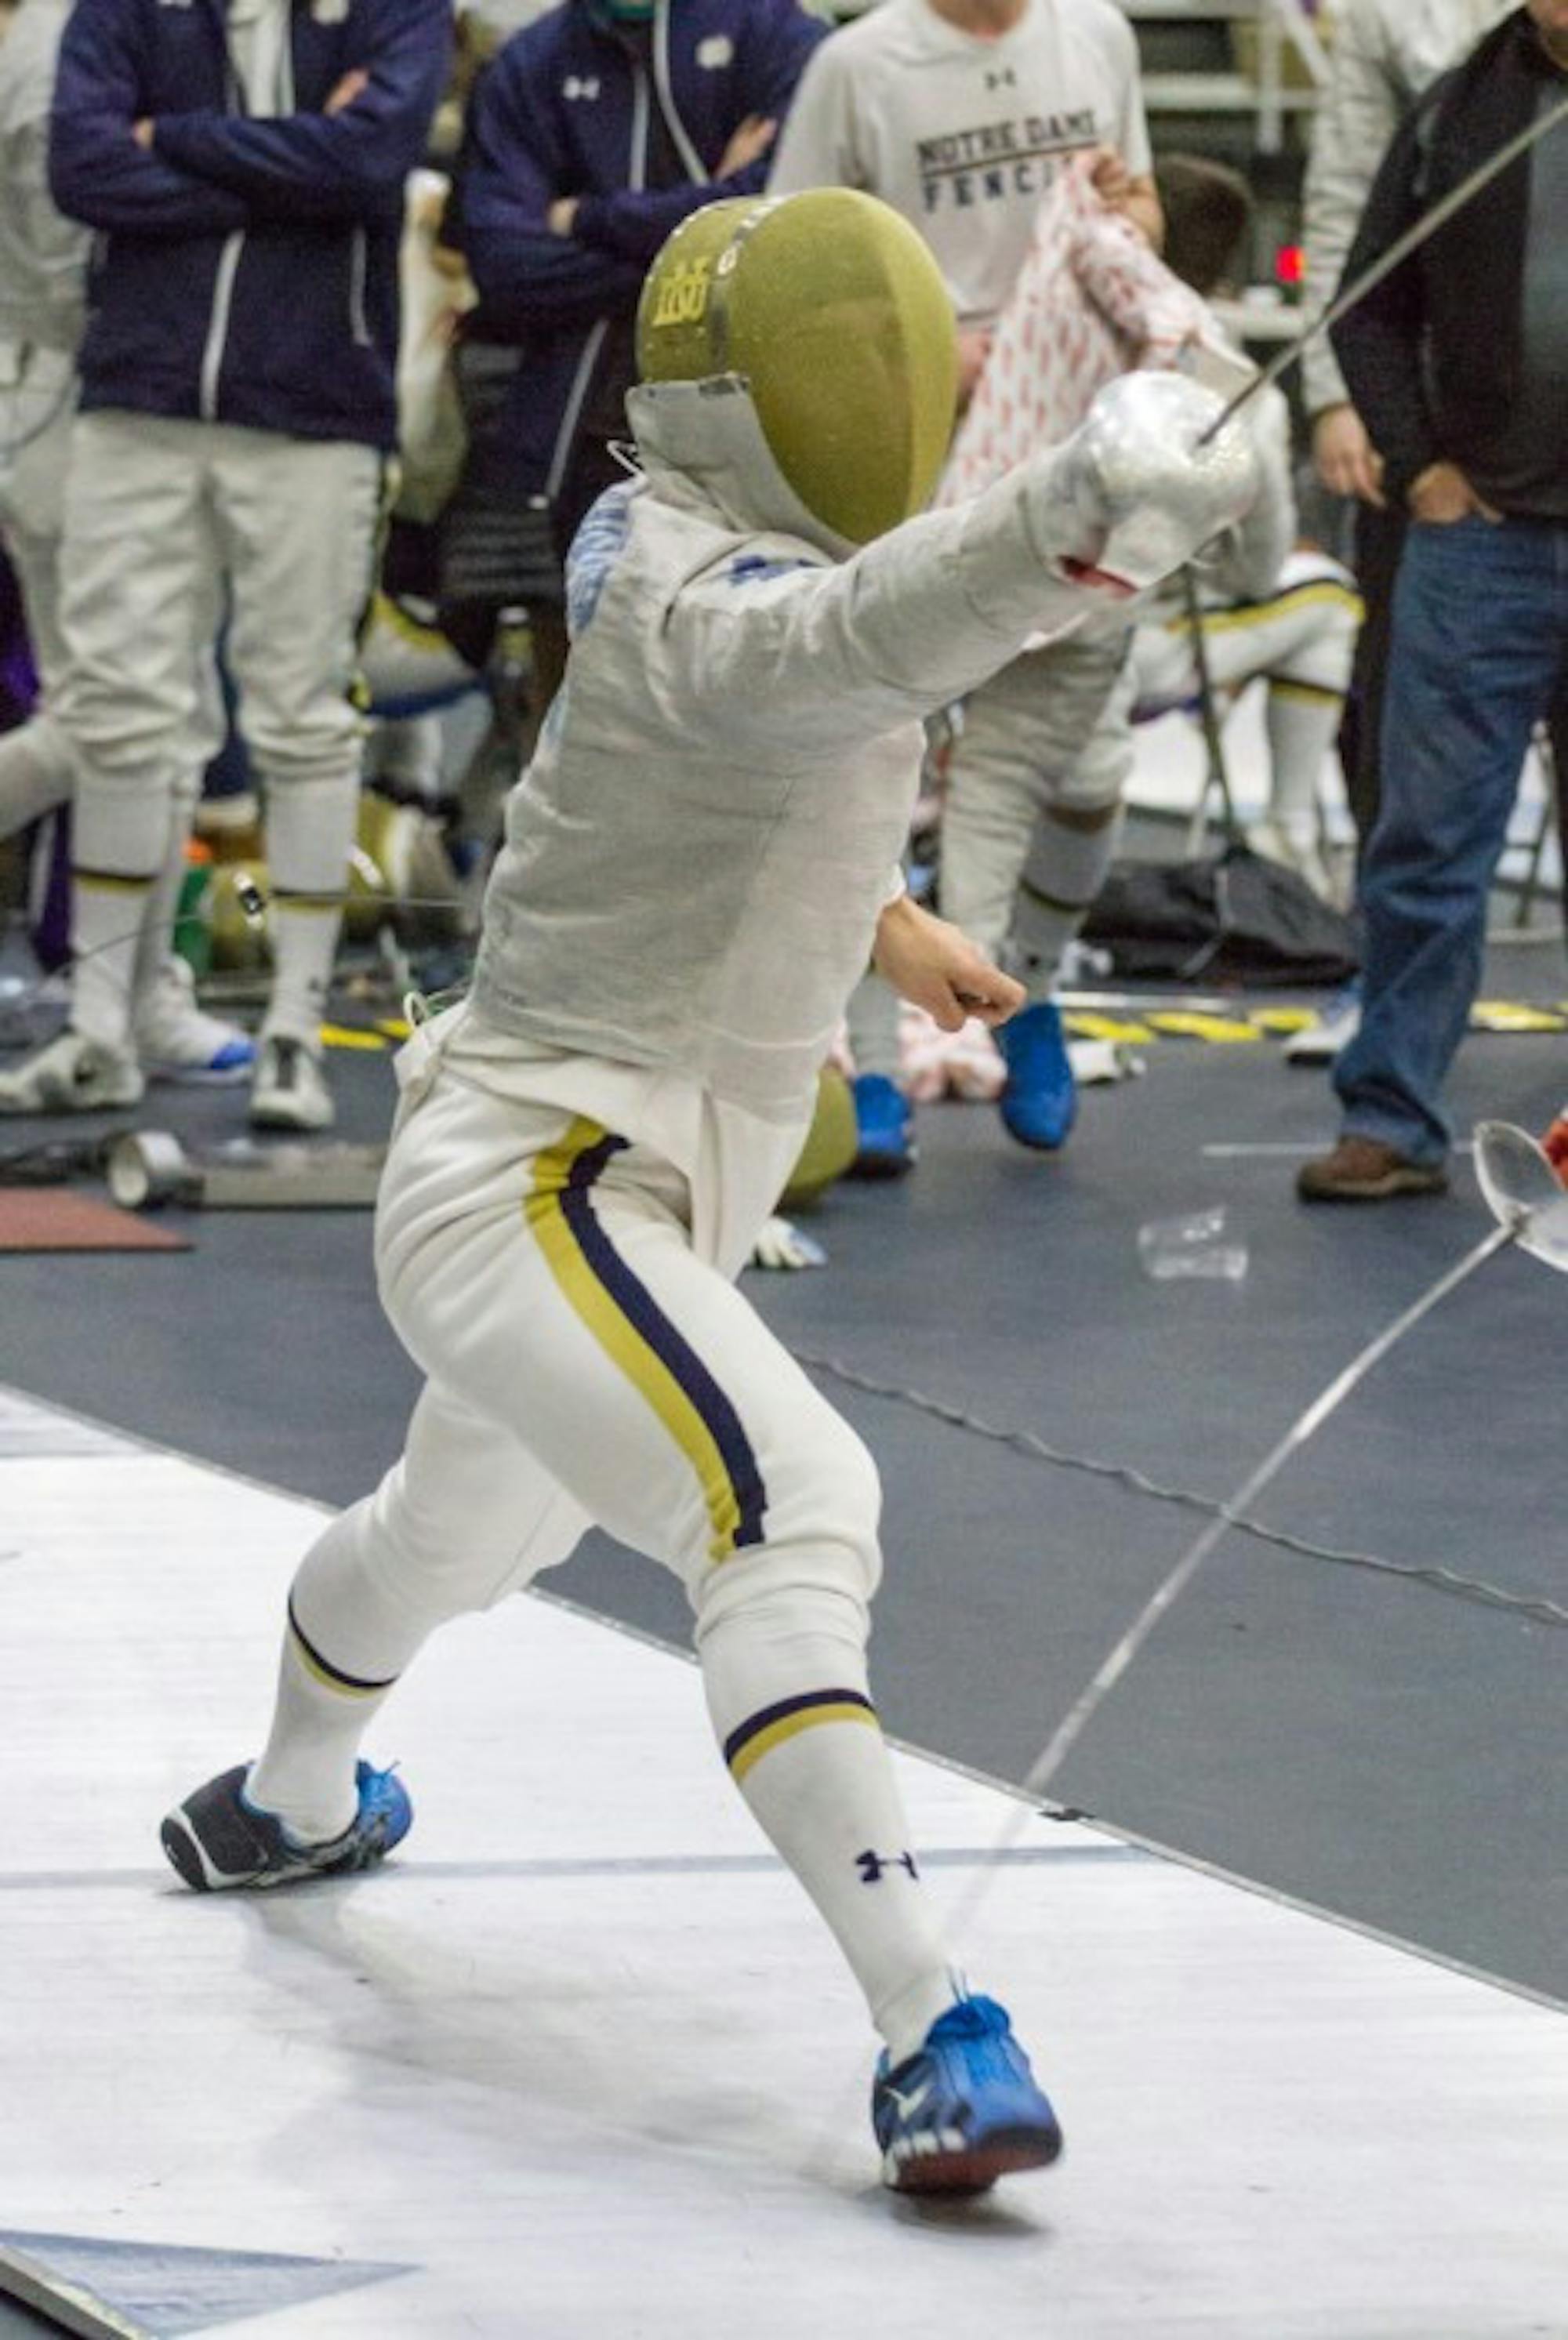 Irish sophomore Jonah Shainberg parries a blow in a match during the DeCicco Duals on Jan. 30 at the Castellan Family Fencing Center. Shainberg went 3-0 in sabre against Penn State in the Duals.